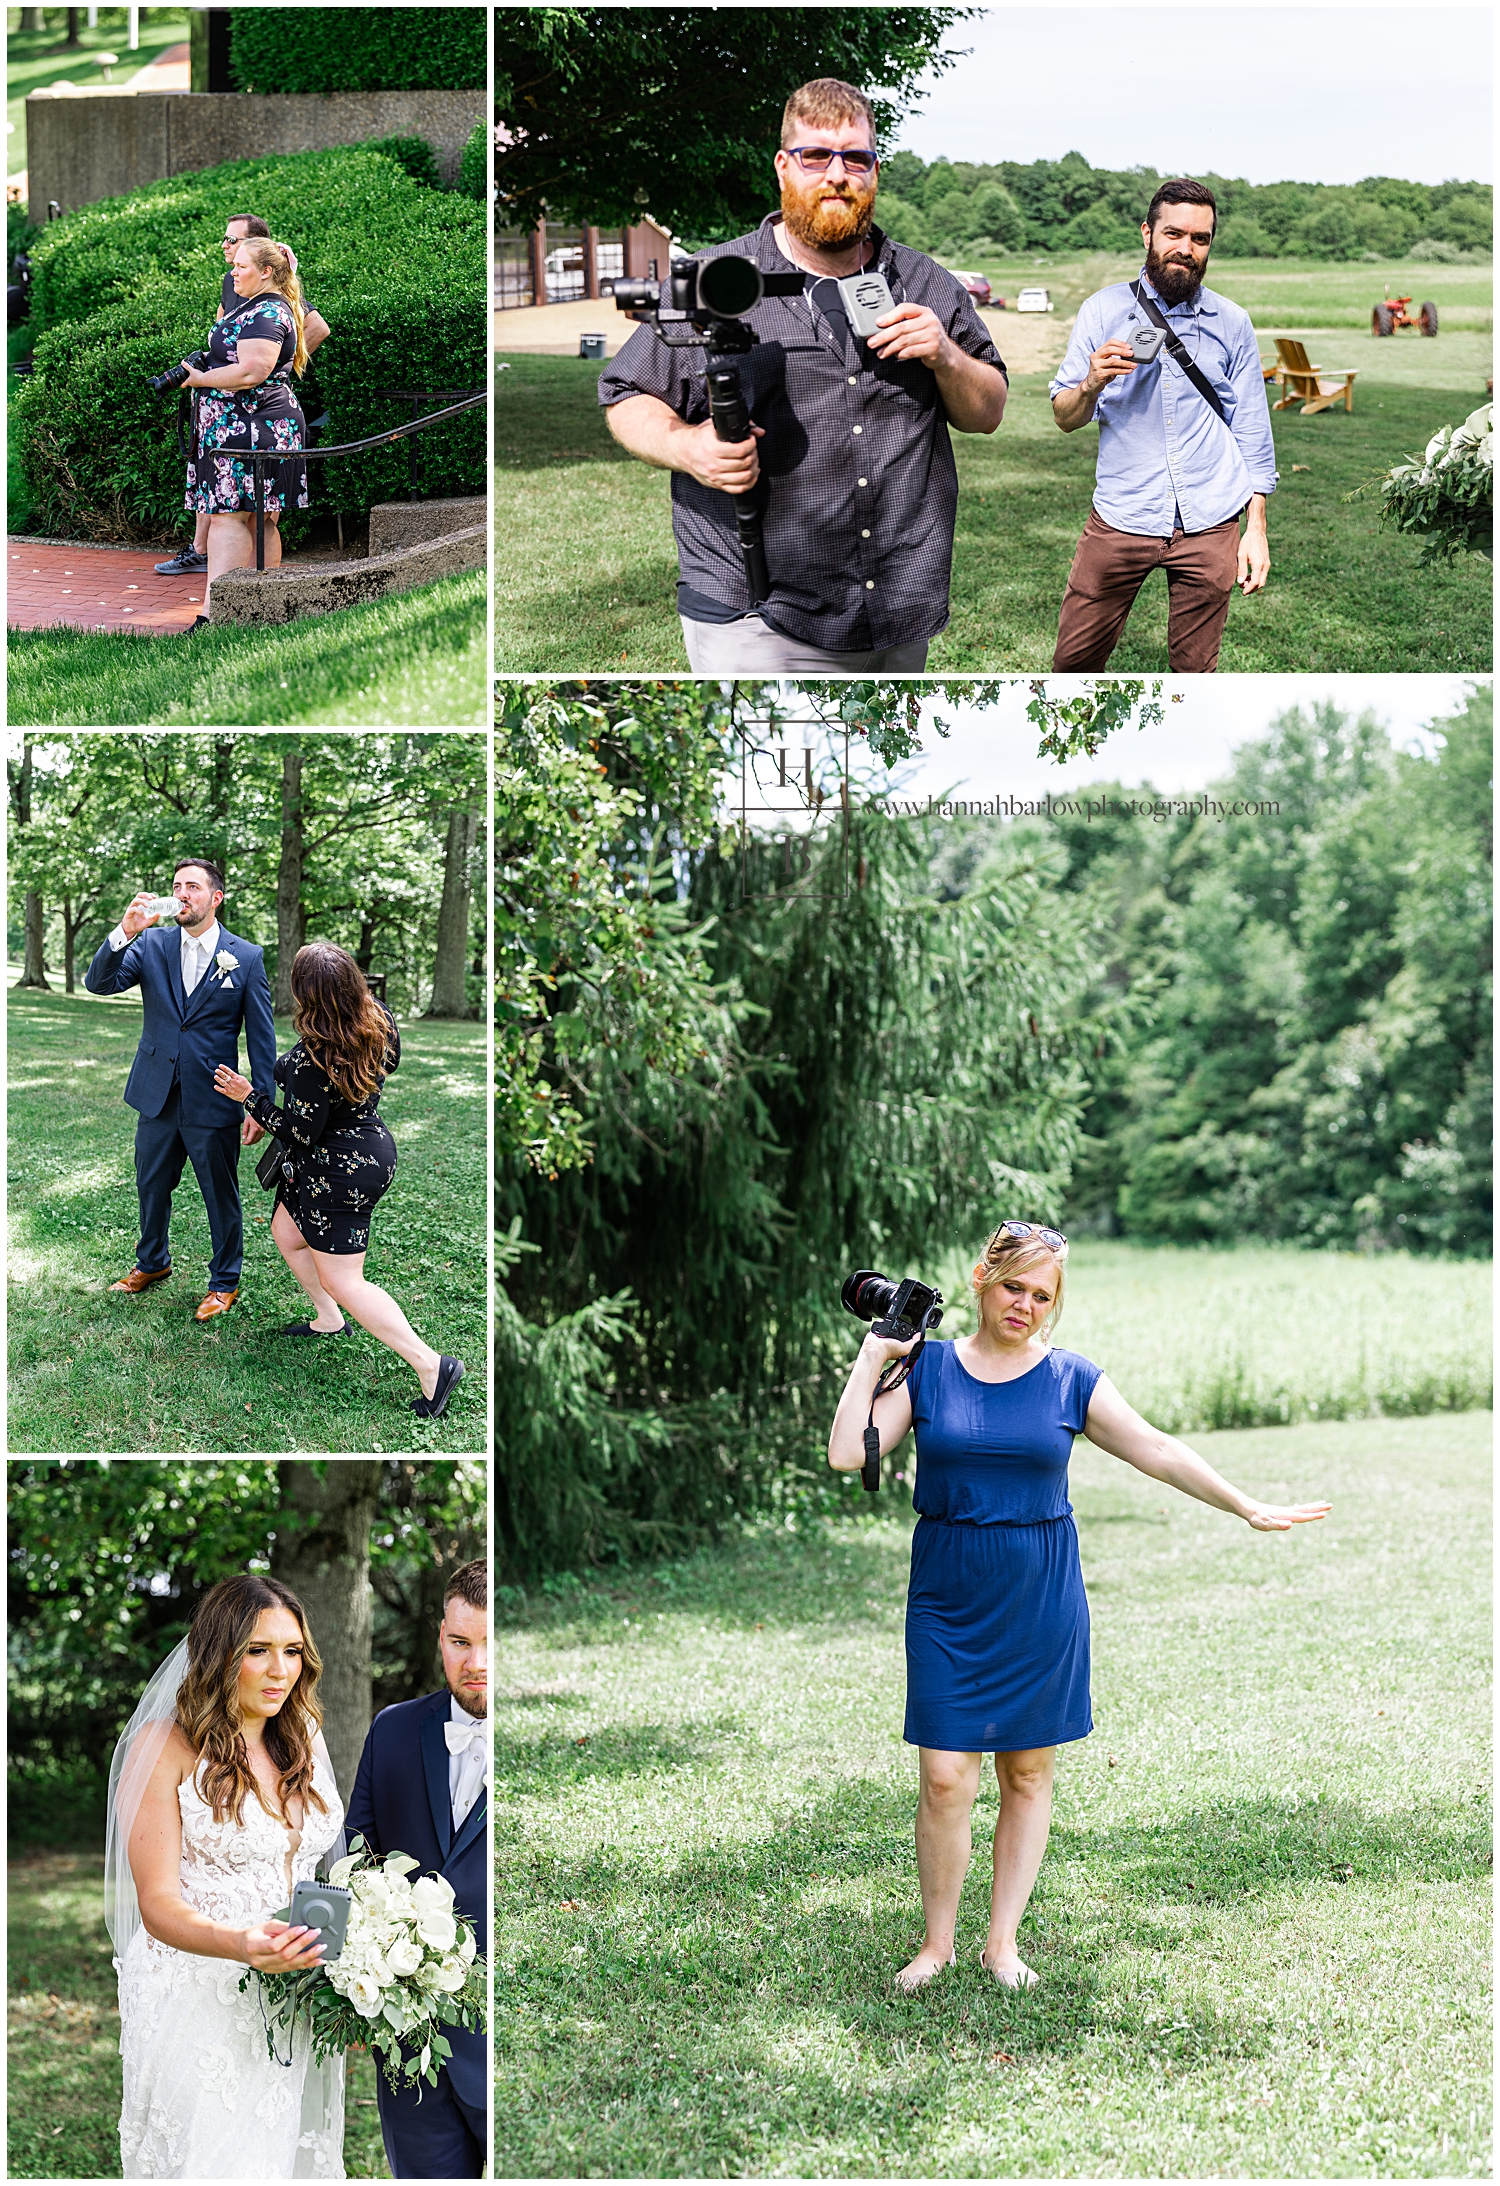 Collage of wedding vendors and couples making funny faces.